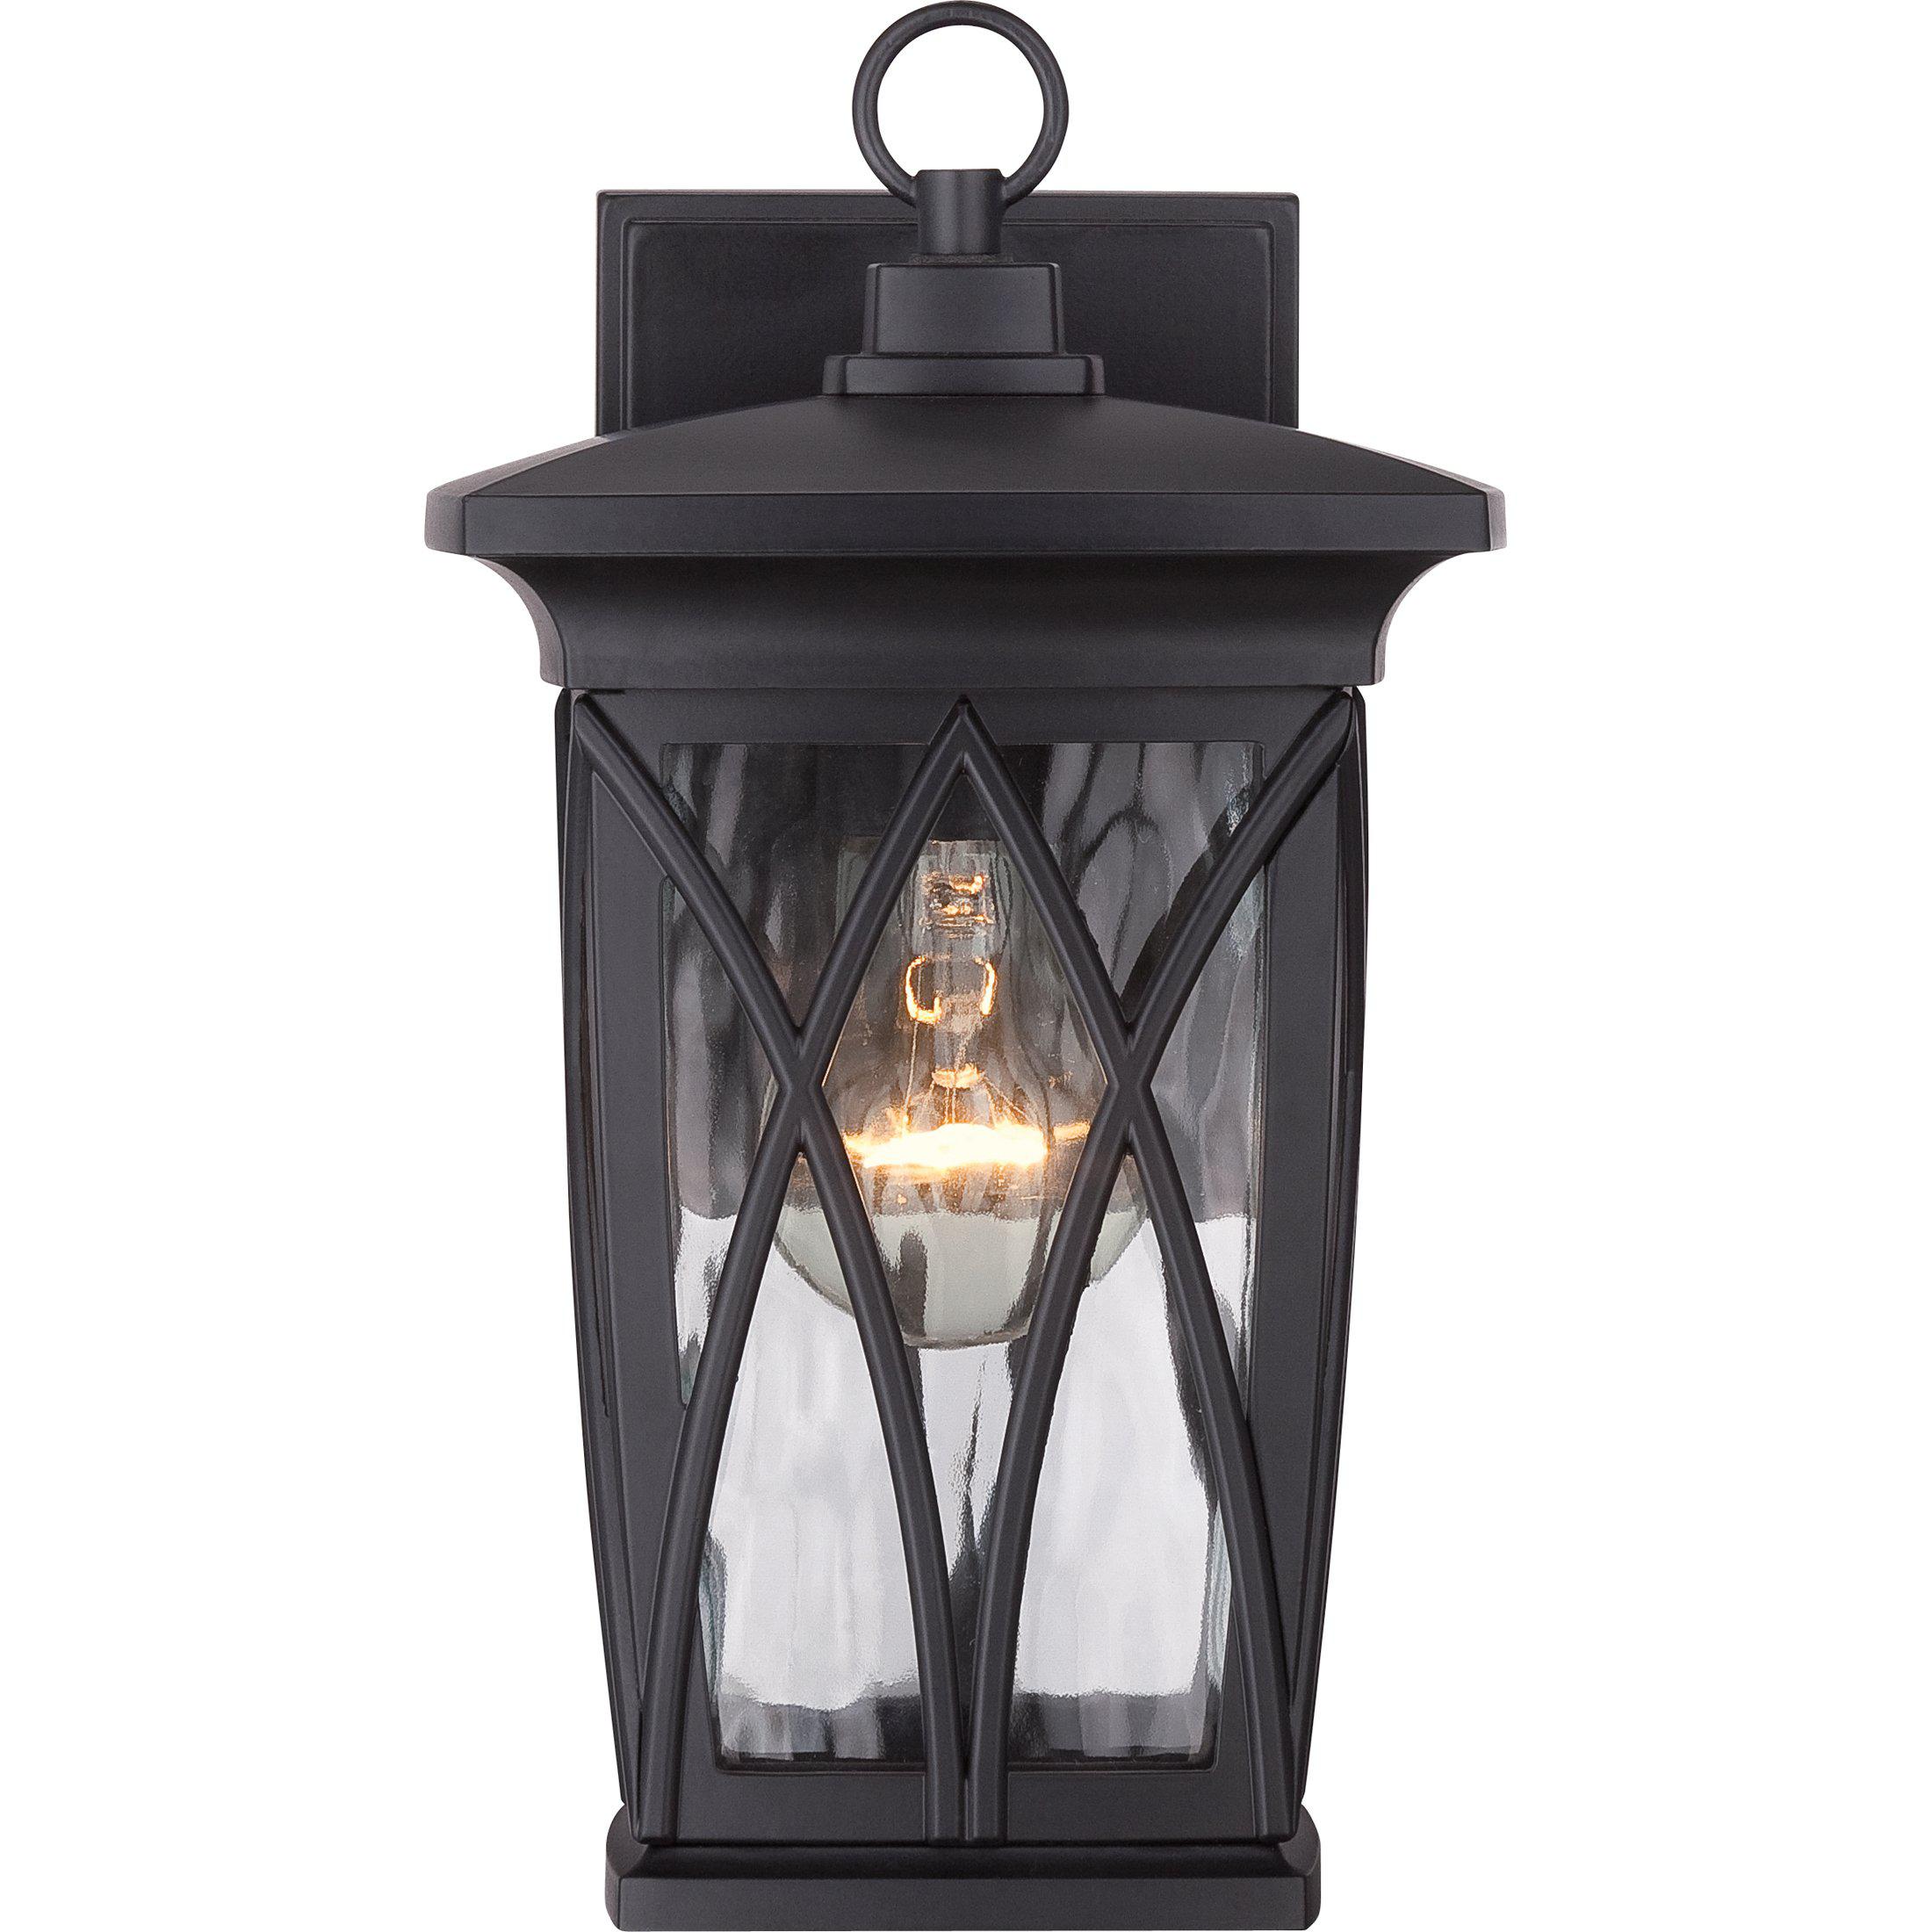 Quoizel  Grover Outdoor Lantern, Small Outdoor l Wall Quoizel   